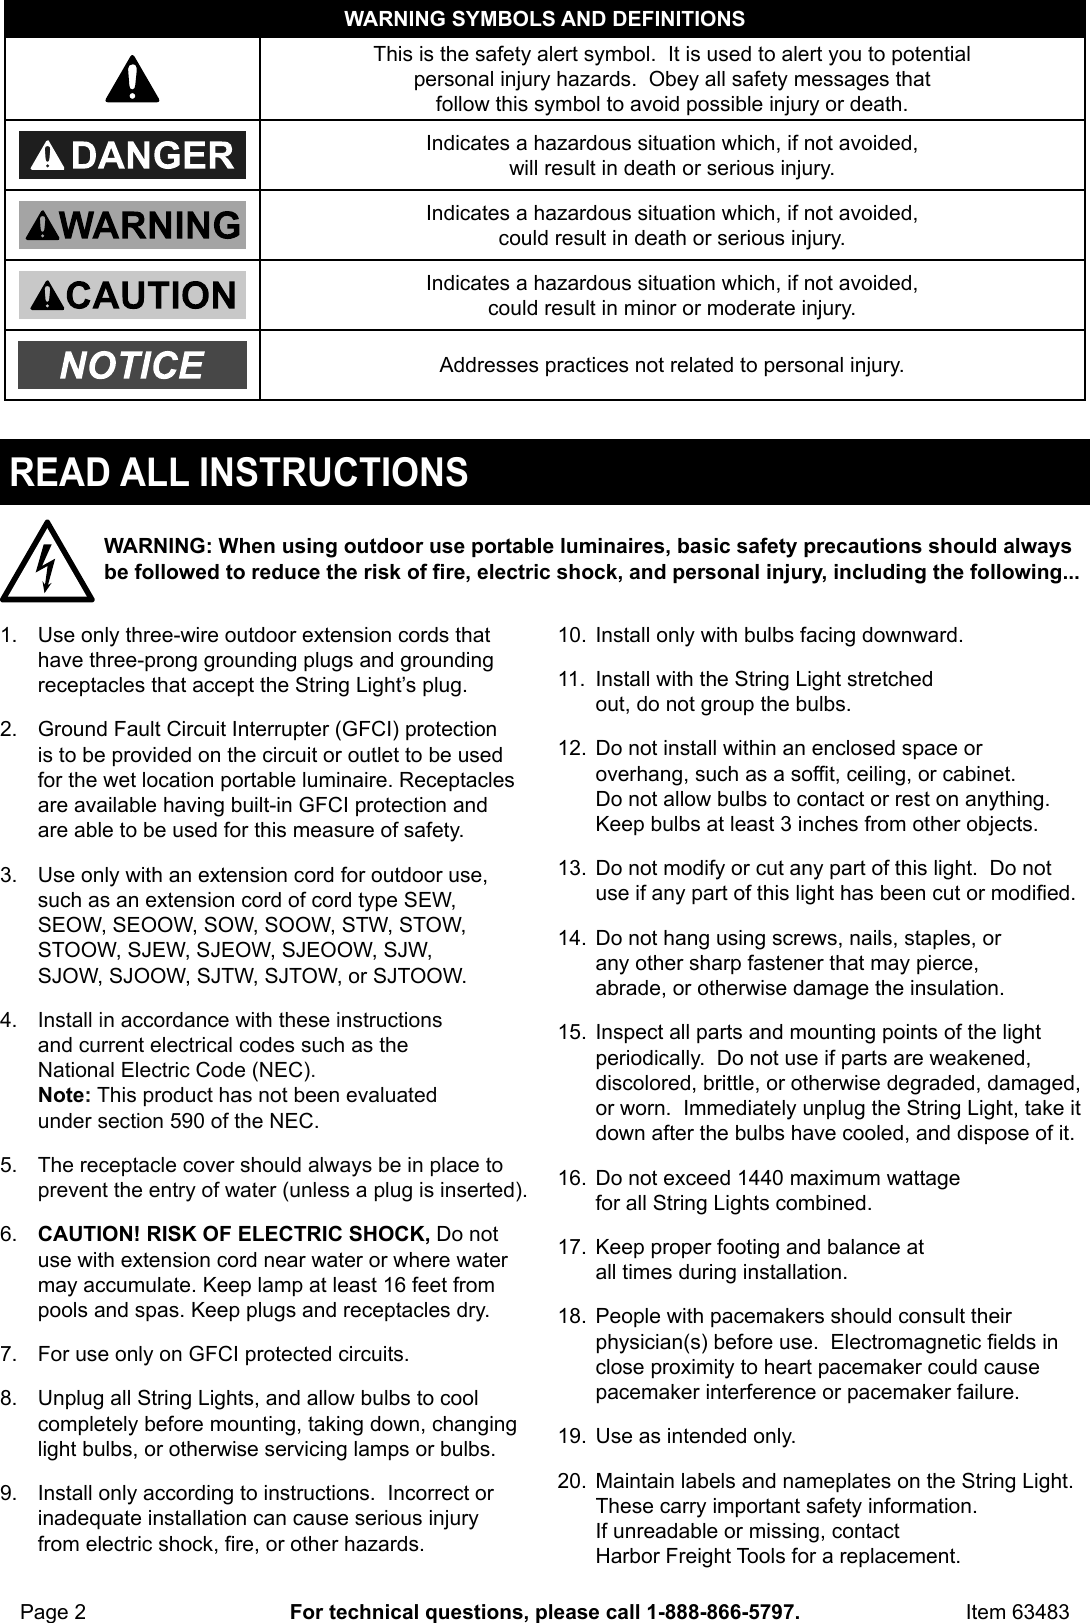 Page 2 of 4 - Manual For The 63483 24 Ft. 12 Bulb Outdoor String Lights